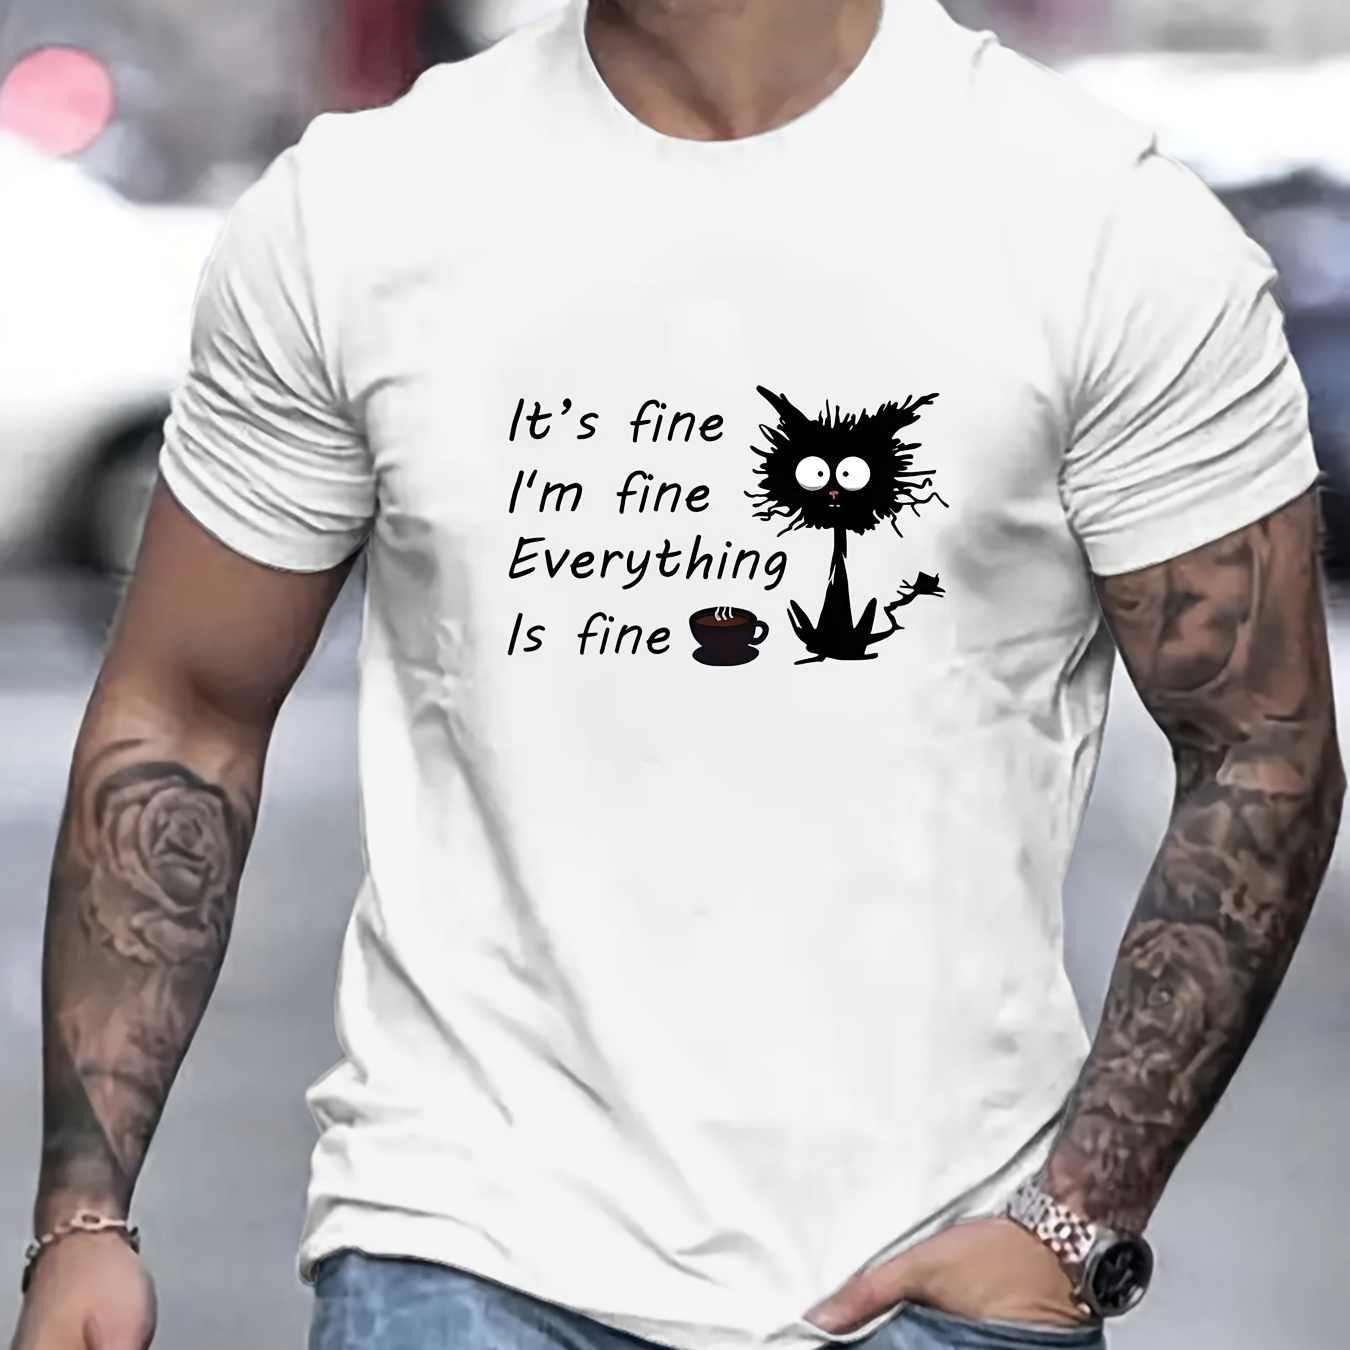 

Everything Is Fine Print T Shirt, Tees For Men, Casual Short Sleeve T-shirt For Summer